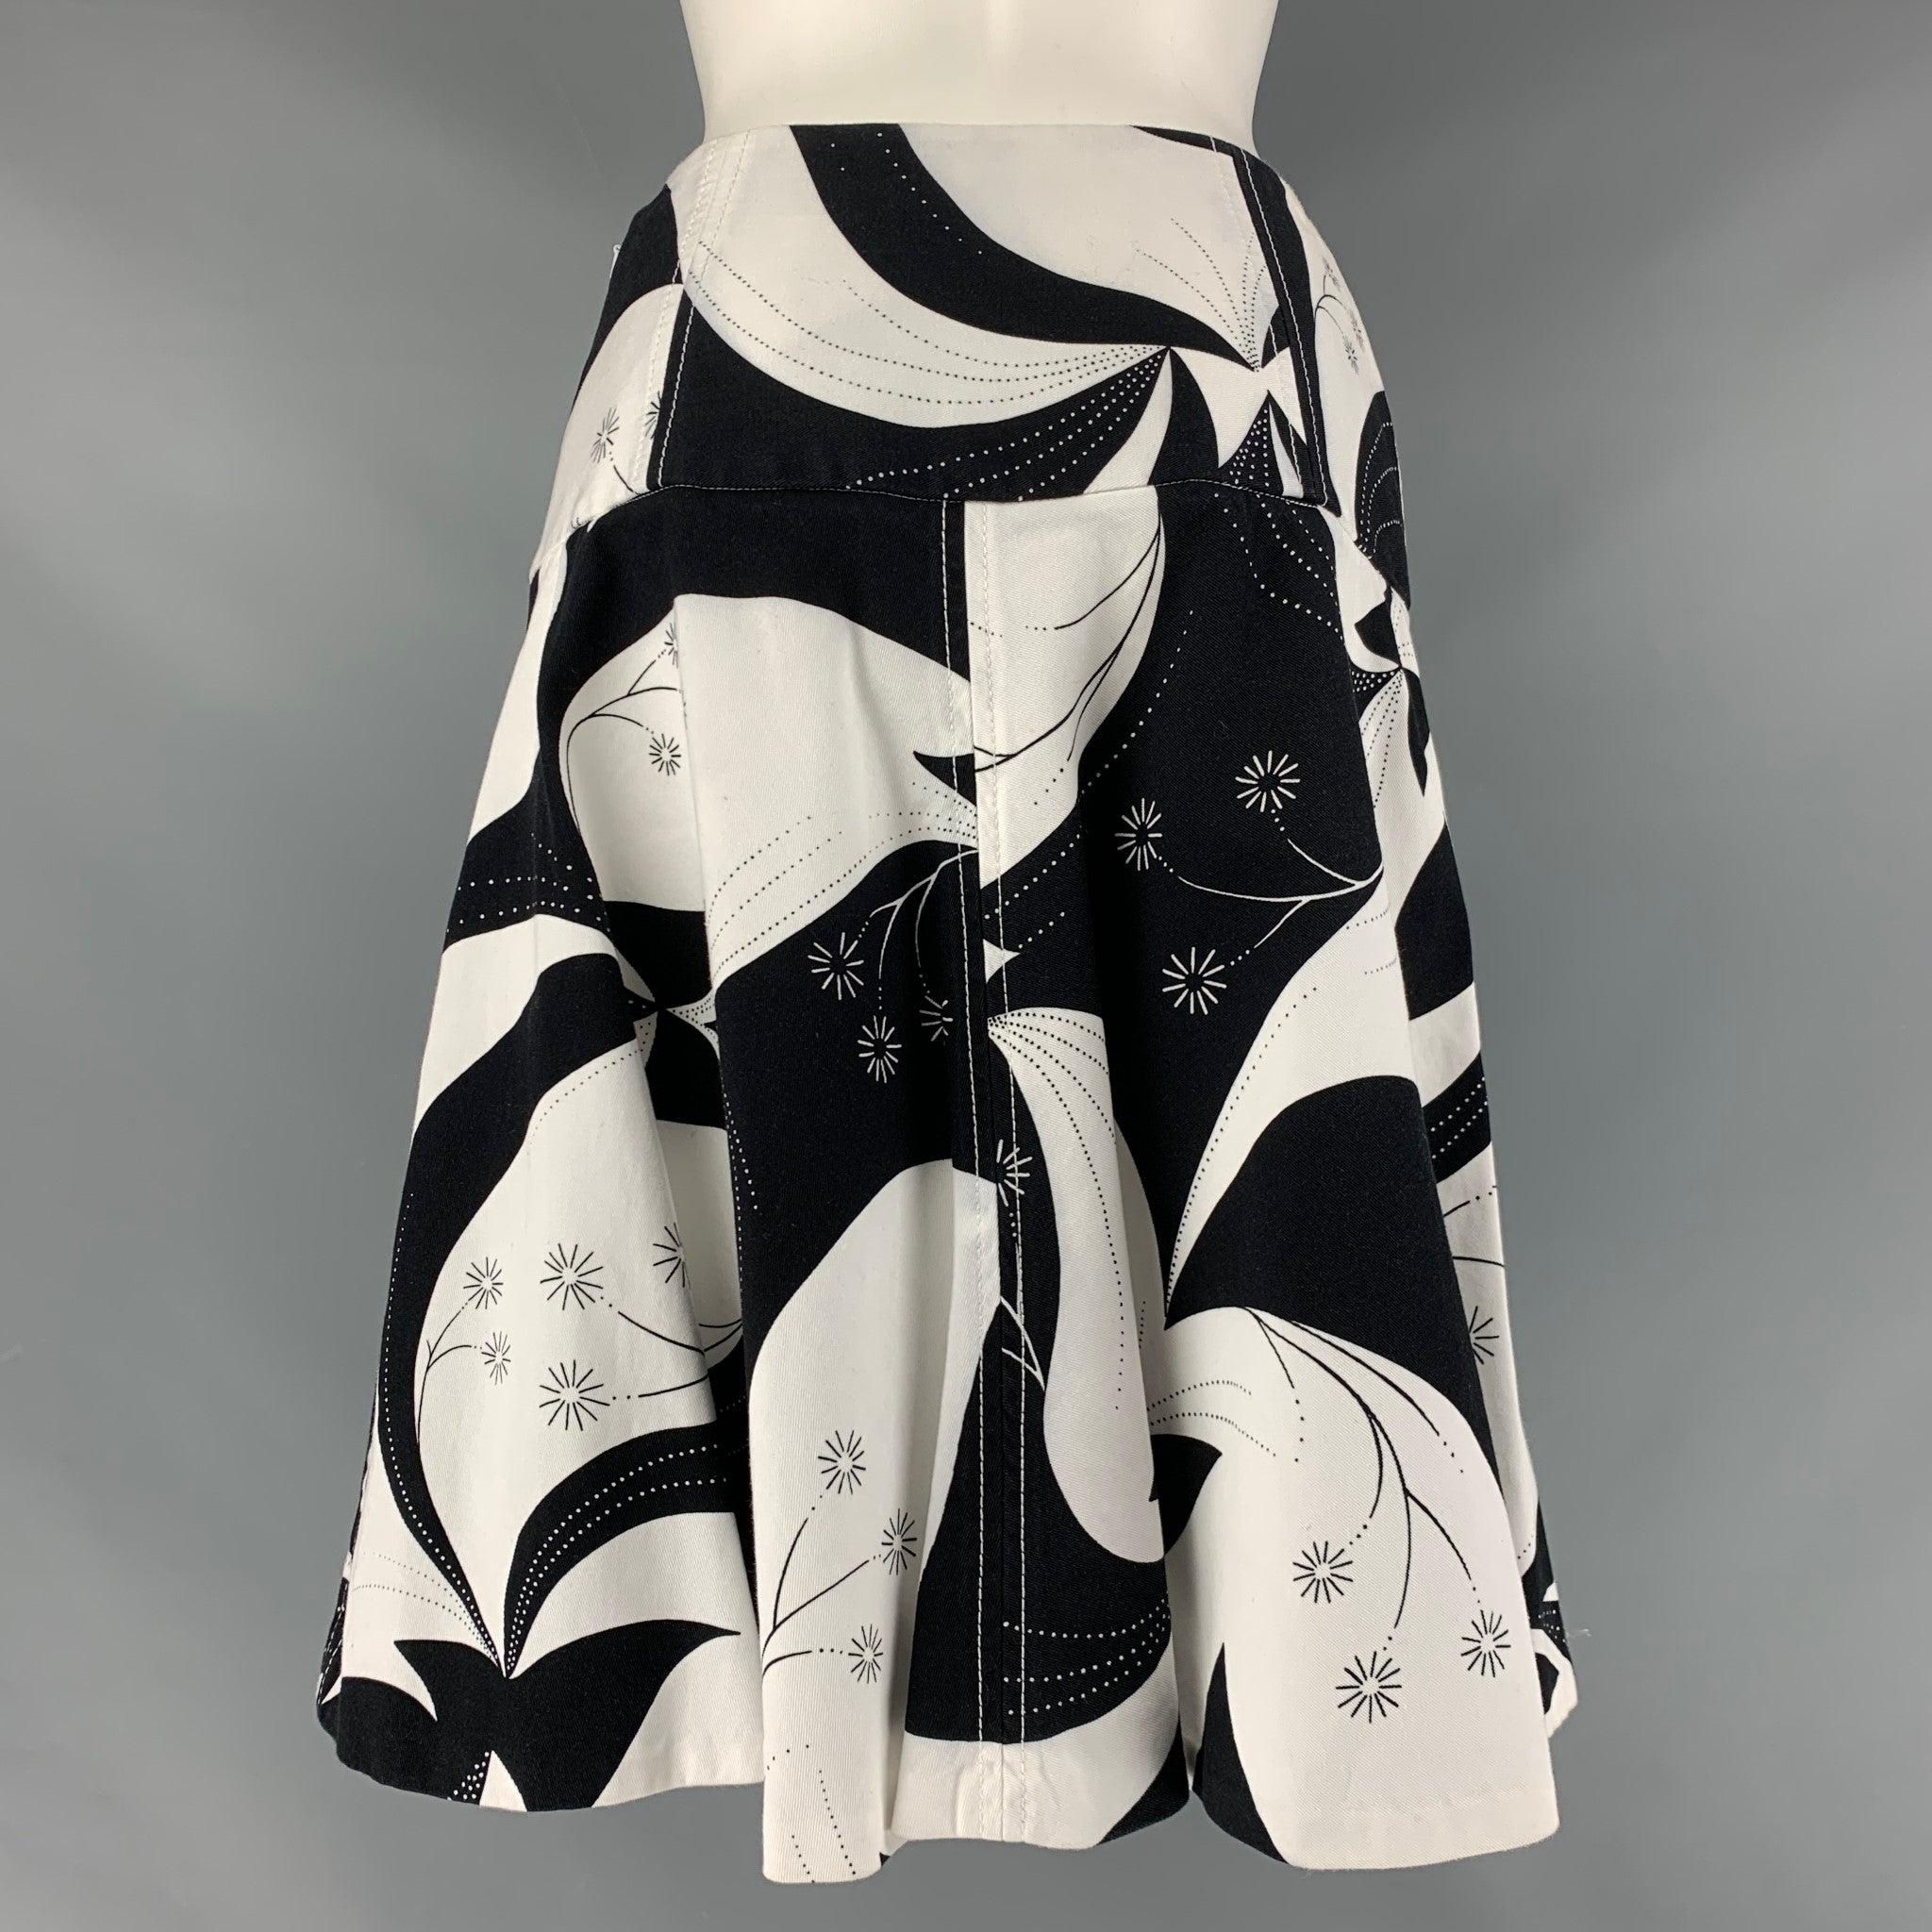 DOLCE & GABBANA Size 4 Black White Cotton Abstract Circle Skirt In Excellent Condition For Sale In San Francisco, CA